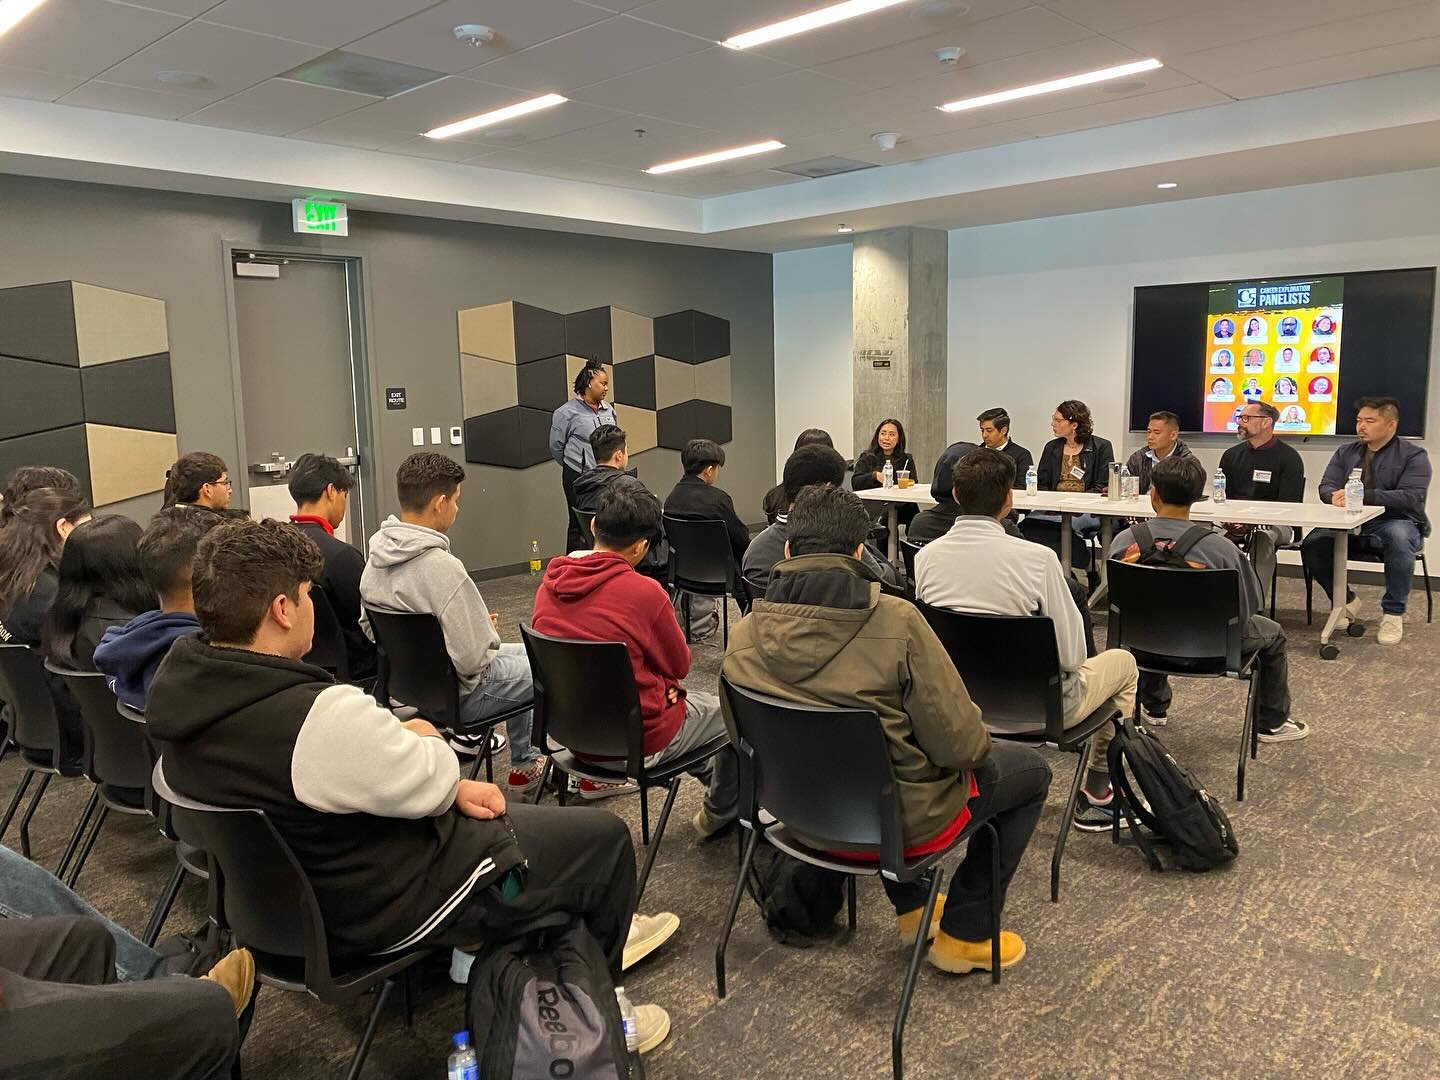 The annual Career Exploration pathway took place this past weekend with the Class of 2025!&nbsp;

Leaders had the opportunity to meet with 12 industry professionals during a &ldquo;speed dating&rdquo; networking event, and hear from our panelists who